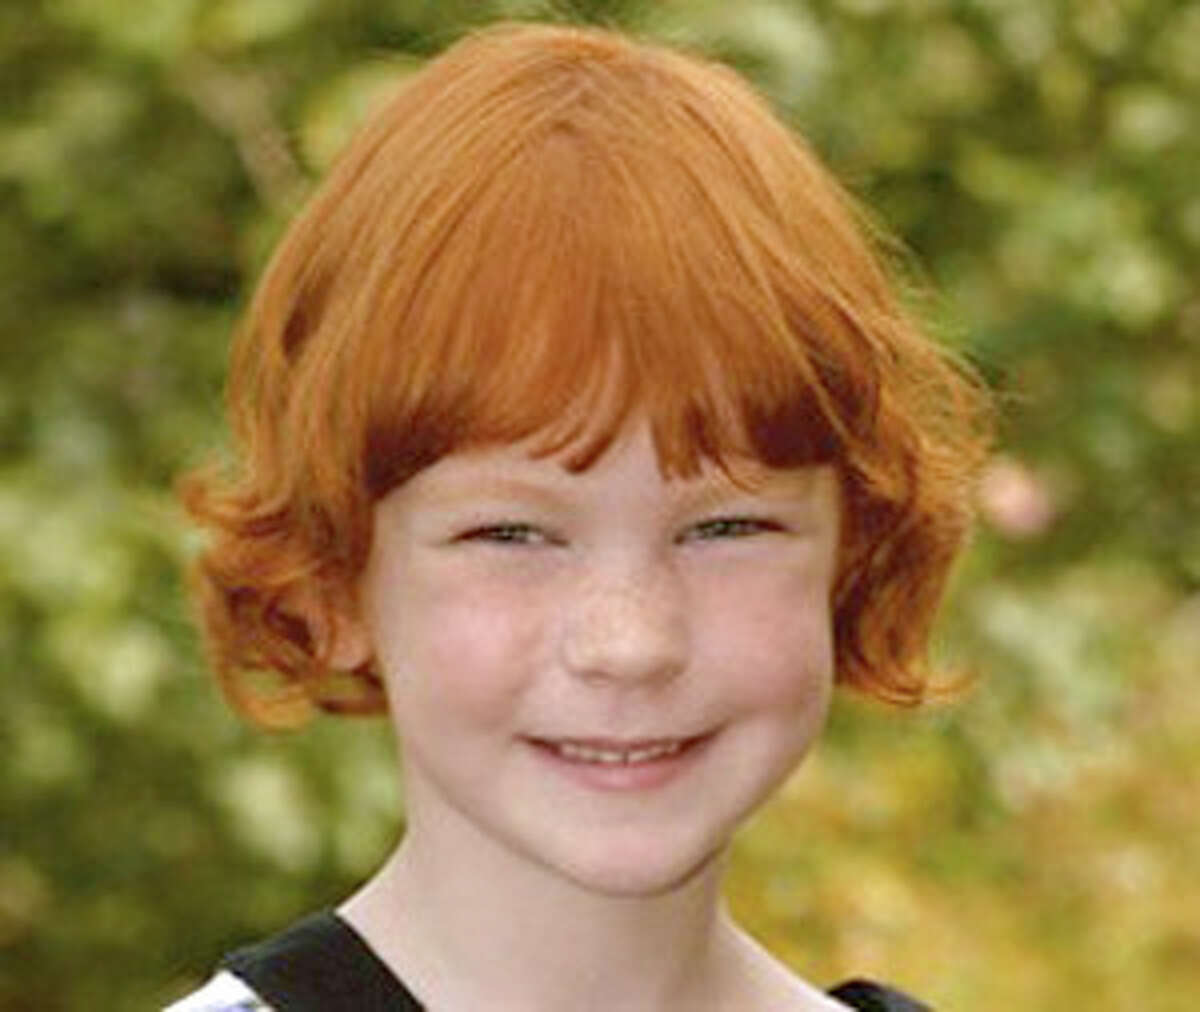 Catherine Hubbard was one of 20 first graders who died in the Sandy Hook Elementary School shooting. She loved animals, and a foundation is raising money to build an animal shelter and education center in her memory. Proceeds from the Shapiro family concert will benefit the project.